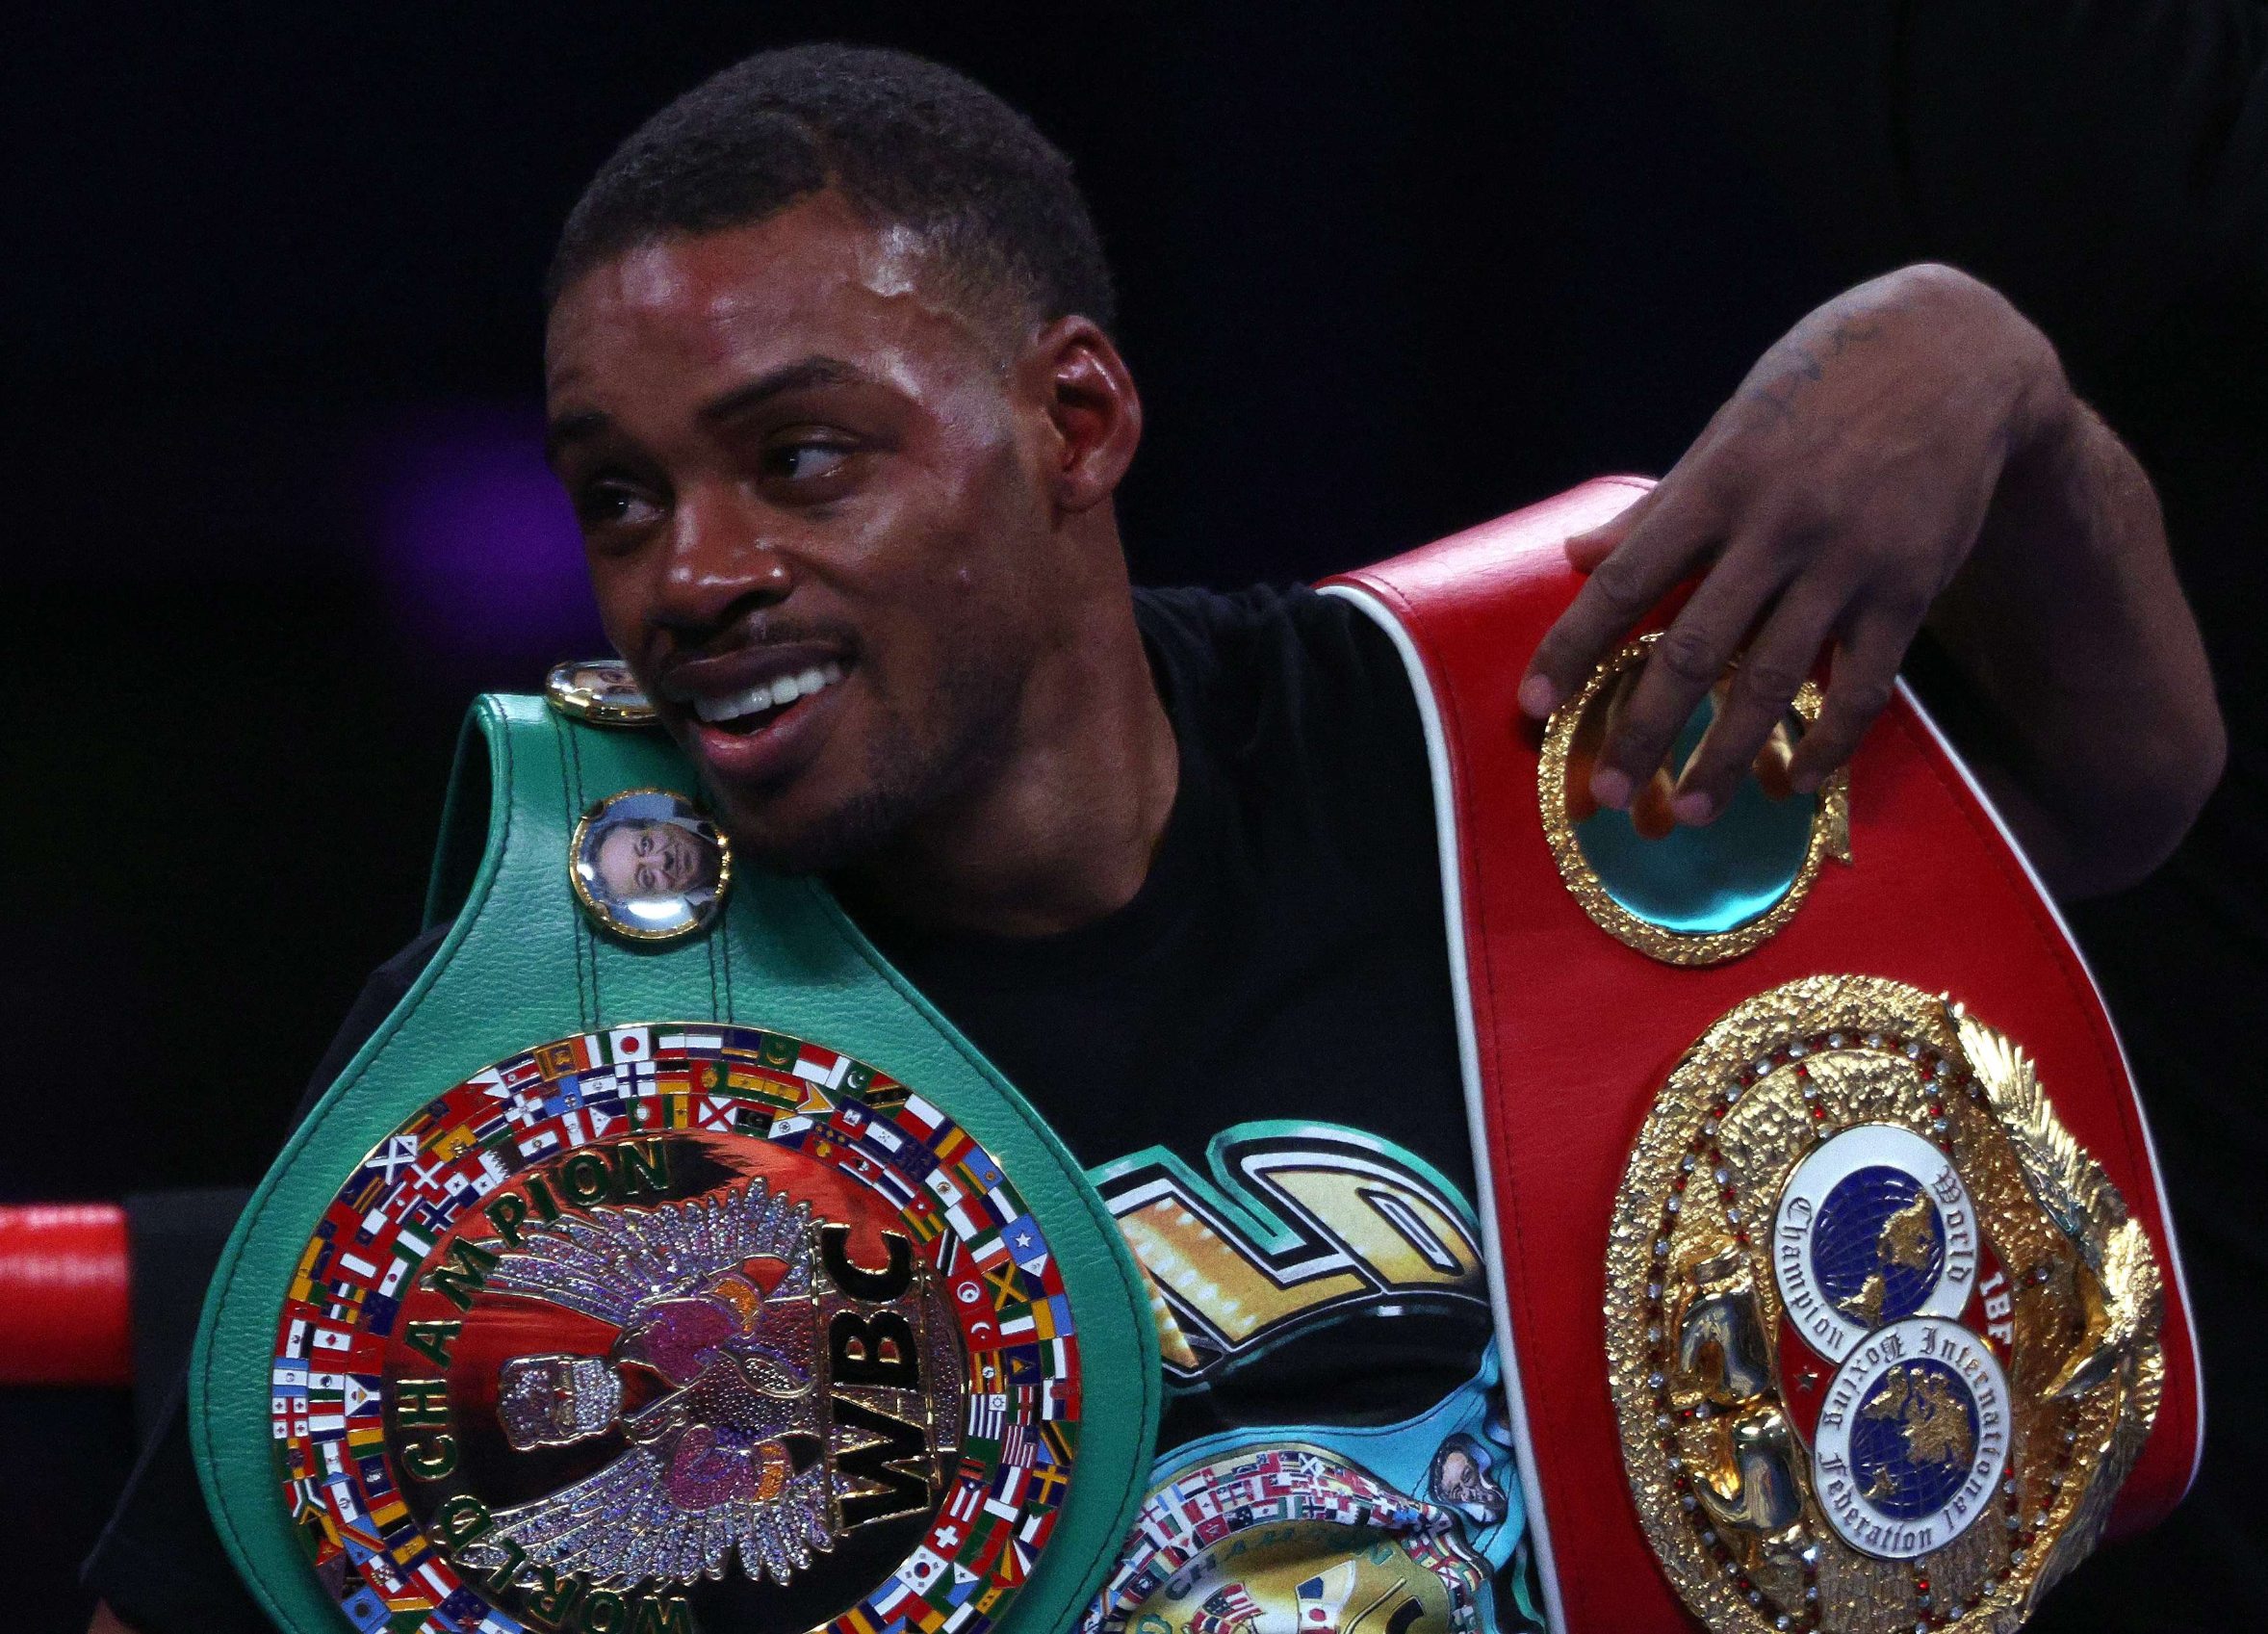 ARLINGTON, TEXAS - DECEMBER 05: (L-R) Errol Spence Jr. after a unanimous decision against Danny Garcia during their WBC & IBF World Welterweight Championship fight at AT&T Stadium on December 05, 2020 in Arlington, Texas.   Ronald Martinez/Getty Images/AFP
== FOR NEWSPAPERS, INTERNET, TELCOS & TELEVISION USE ONLY ==